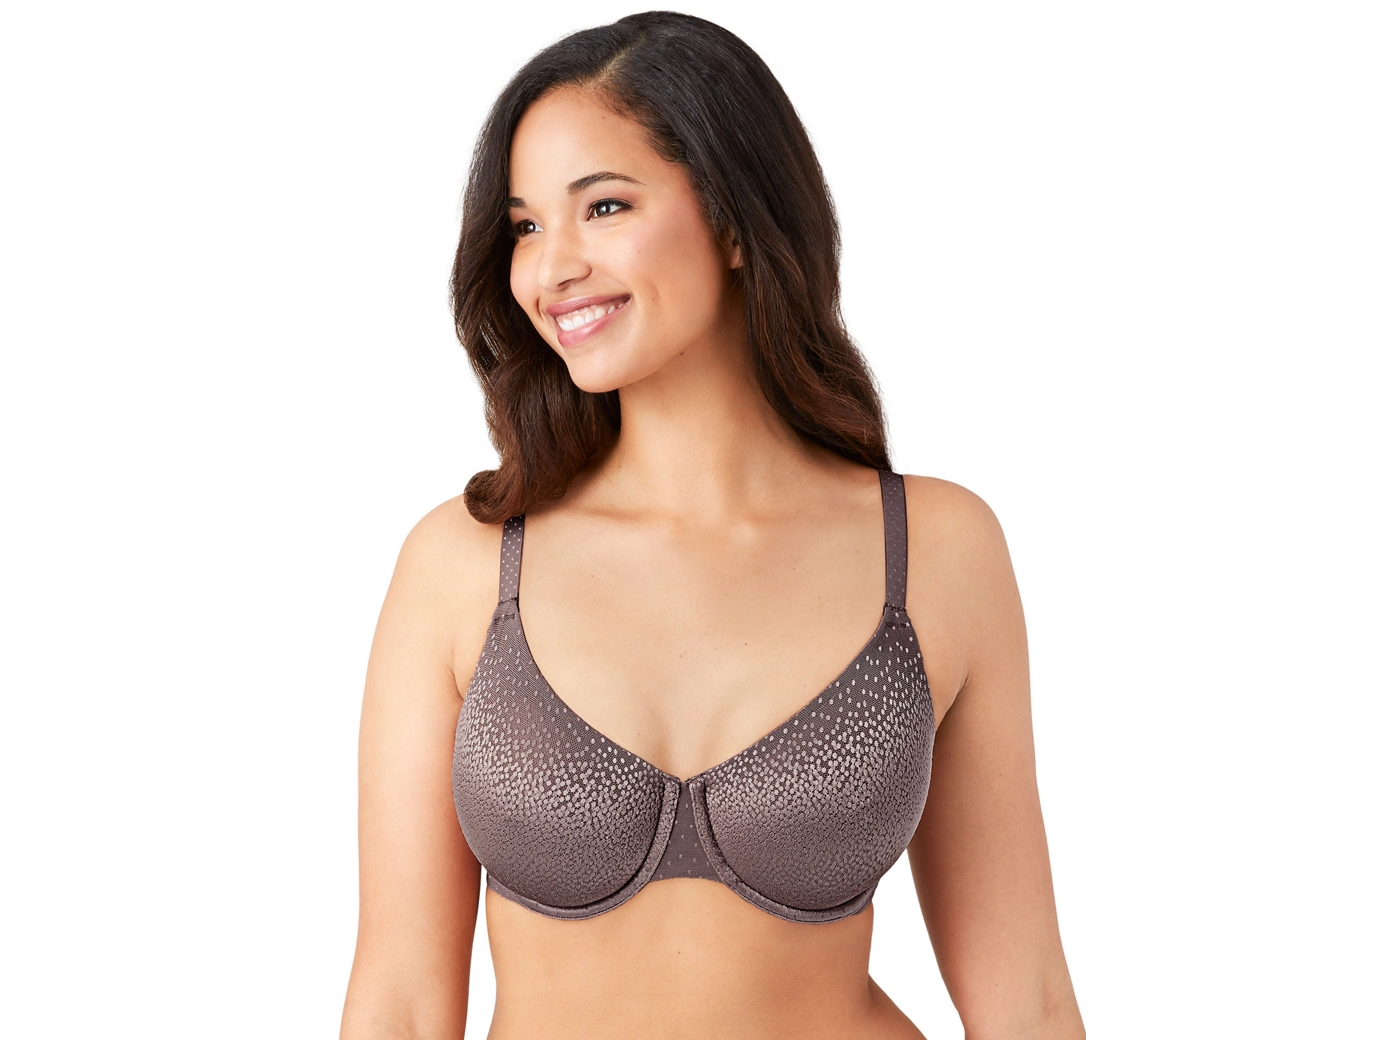 Back-Smoothing Bras for a Sleek, Bulge-Free Fit